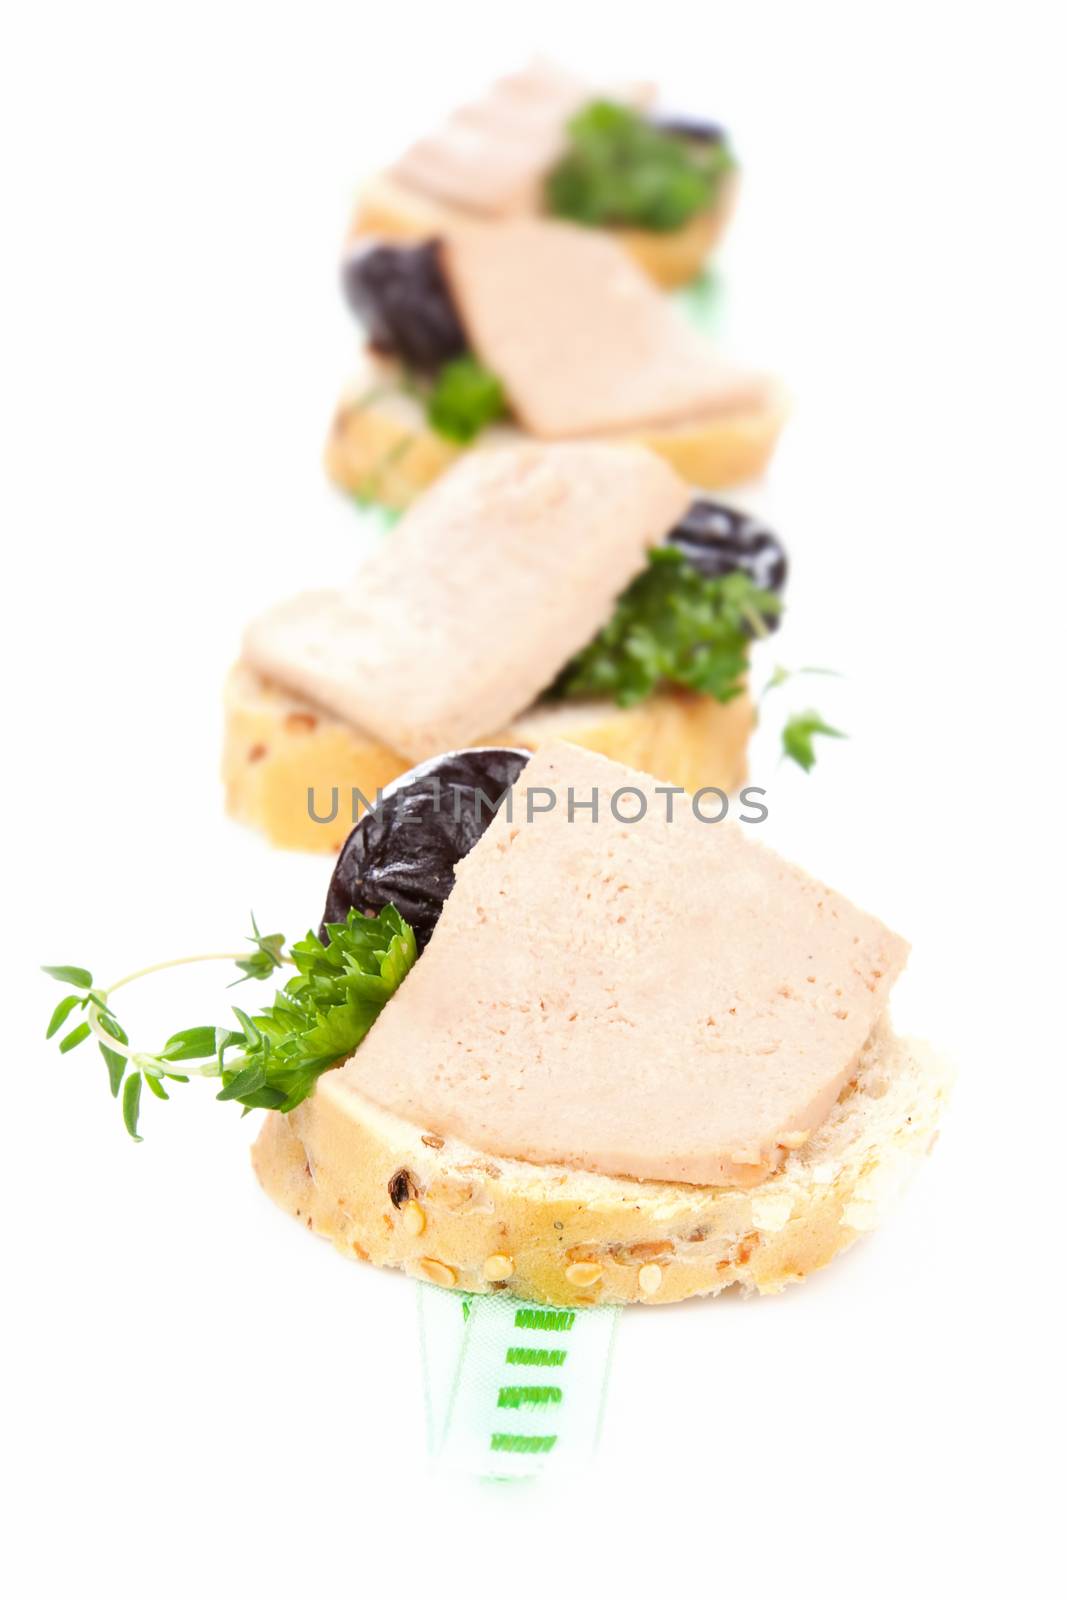 Luxurious culinary eating. White bread with pate, herbs and dried plumb. 